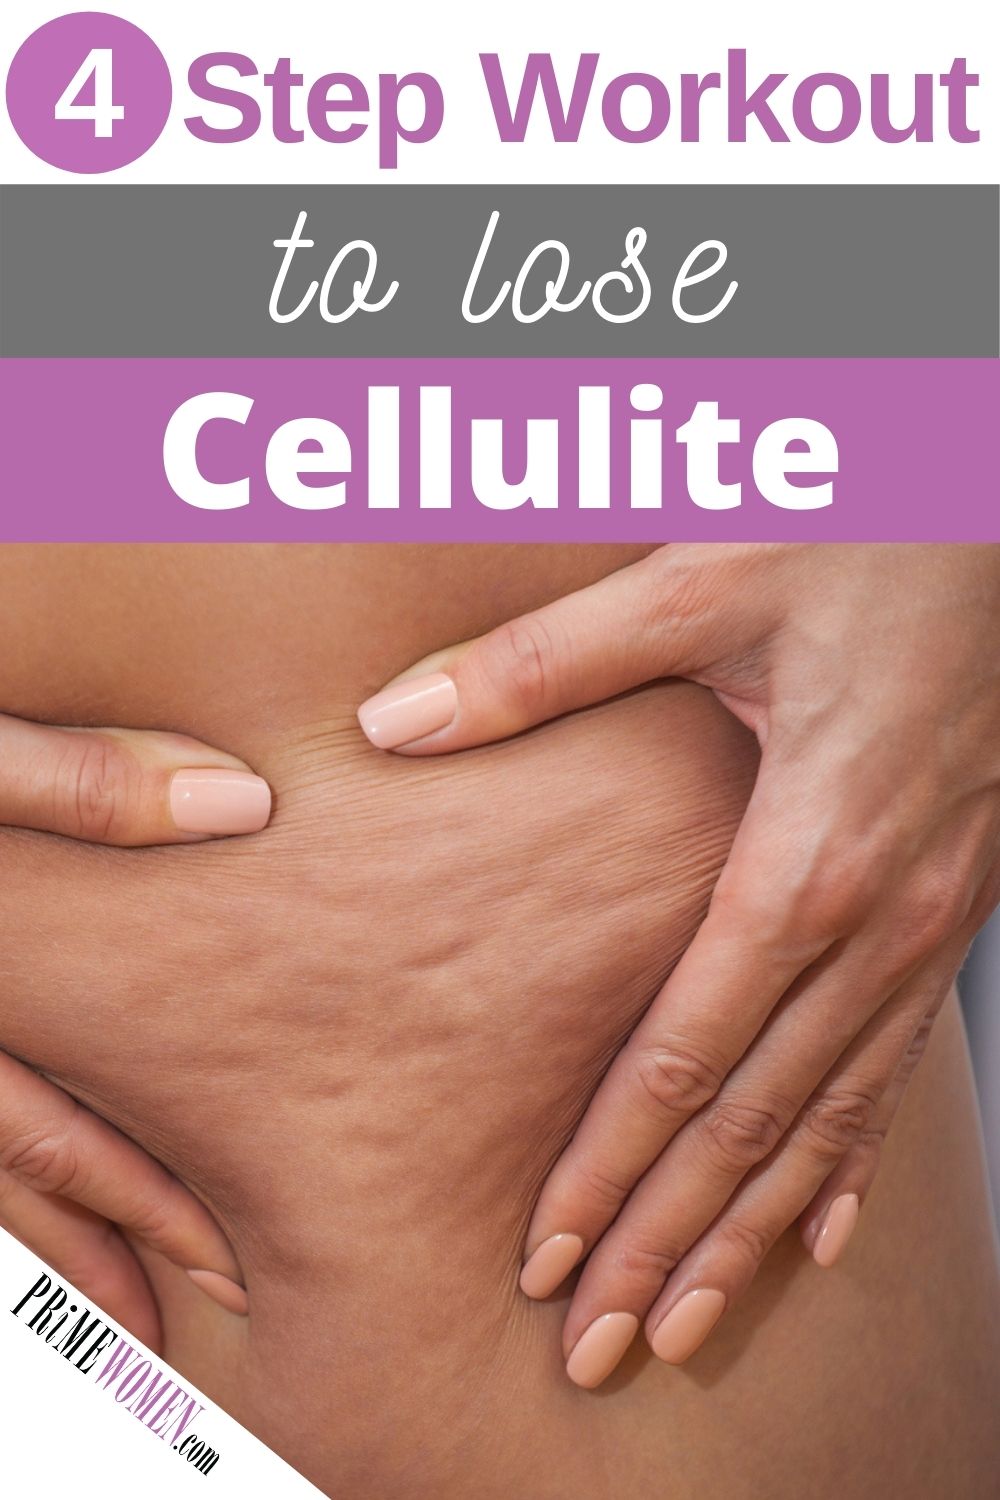 4 Step Workout to lose cellulite